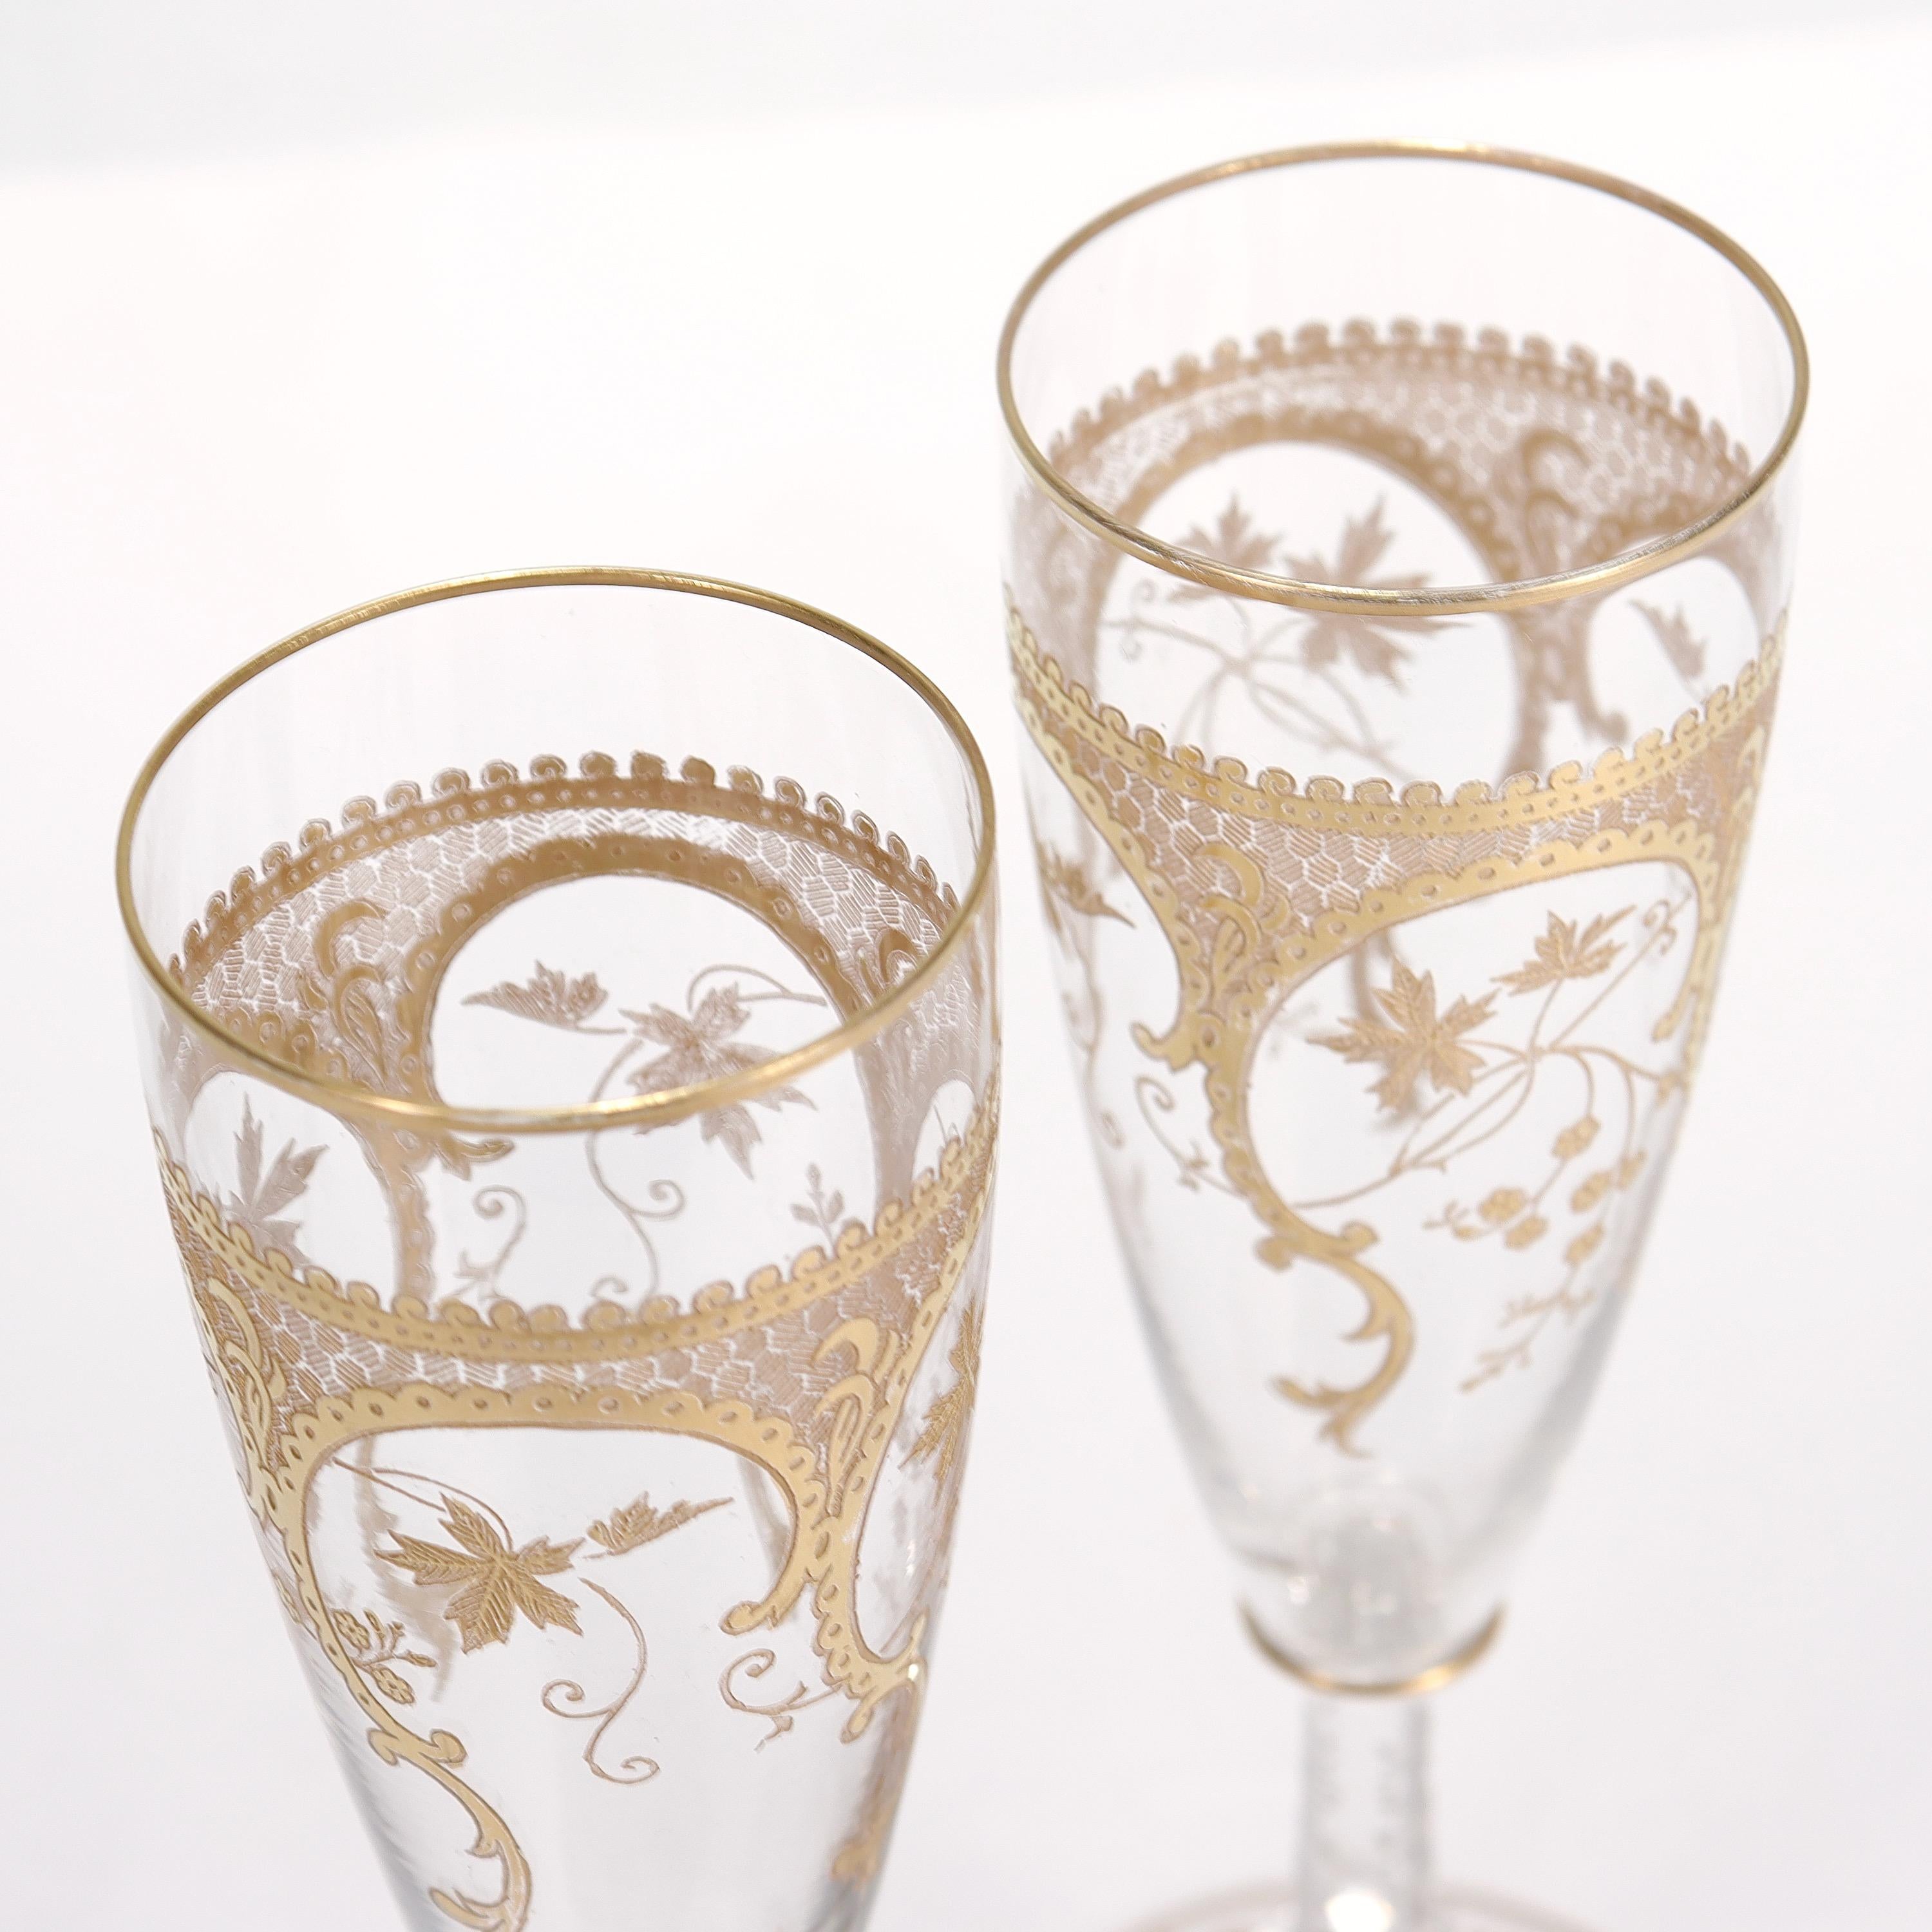 Pair of Richly Gilt Antique Etched & Cut Glass Champagne Stems / Toasting Flutes 6